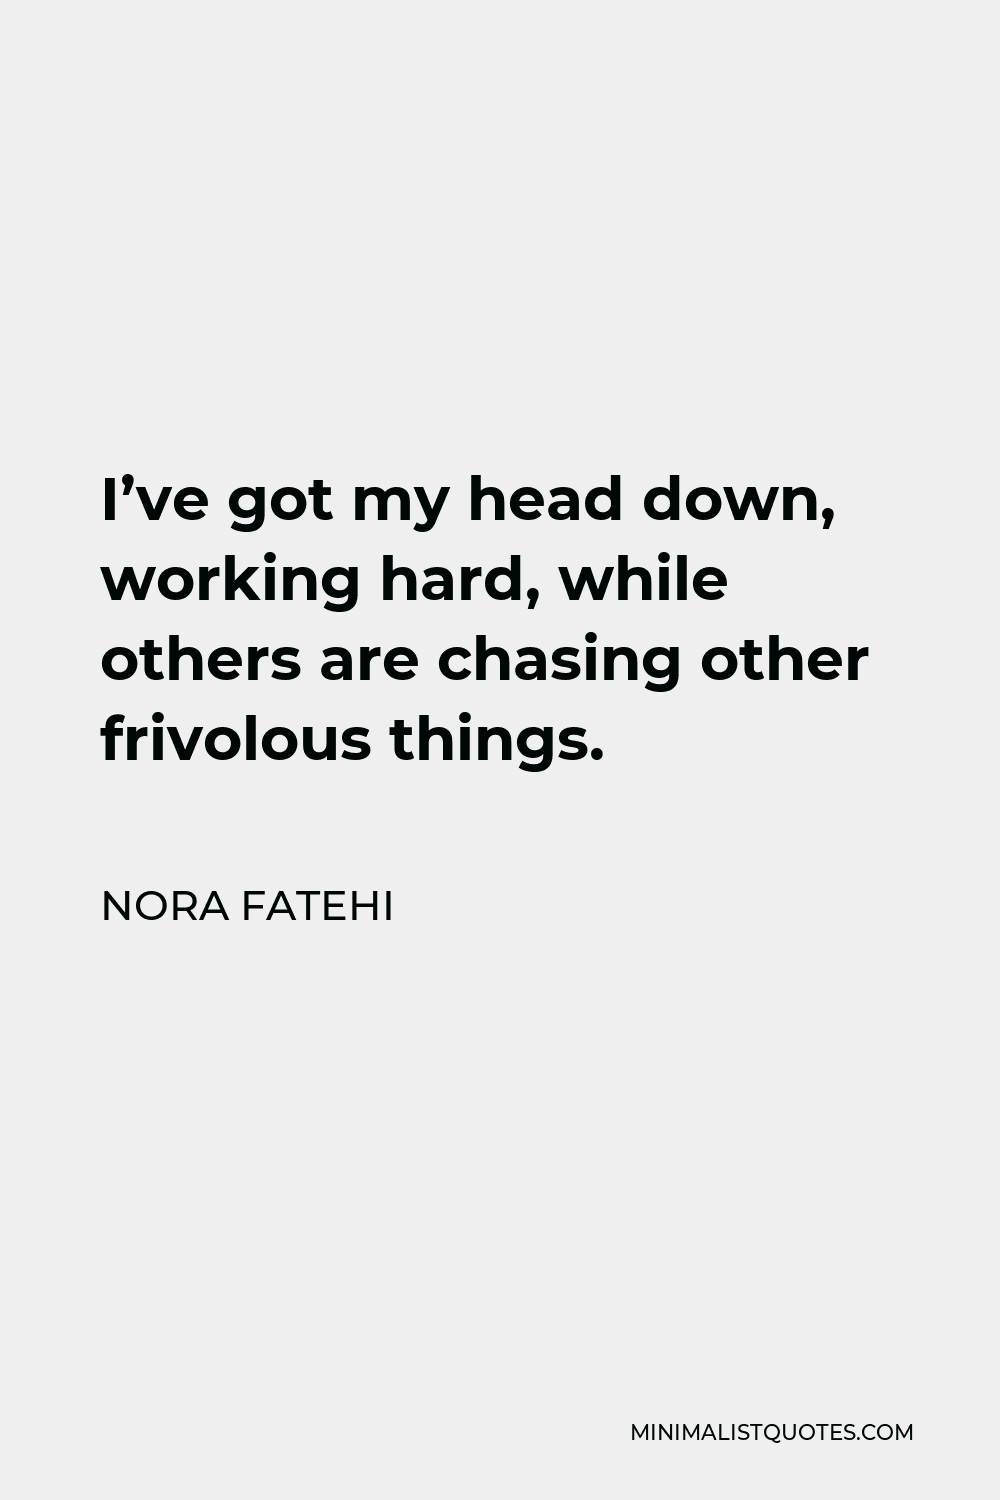 Nora Fatehi Quote - I’ve got my head down, working hard, while others are chasing other frivolous things.